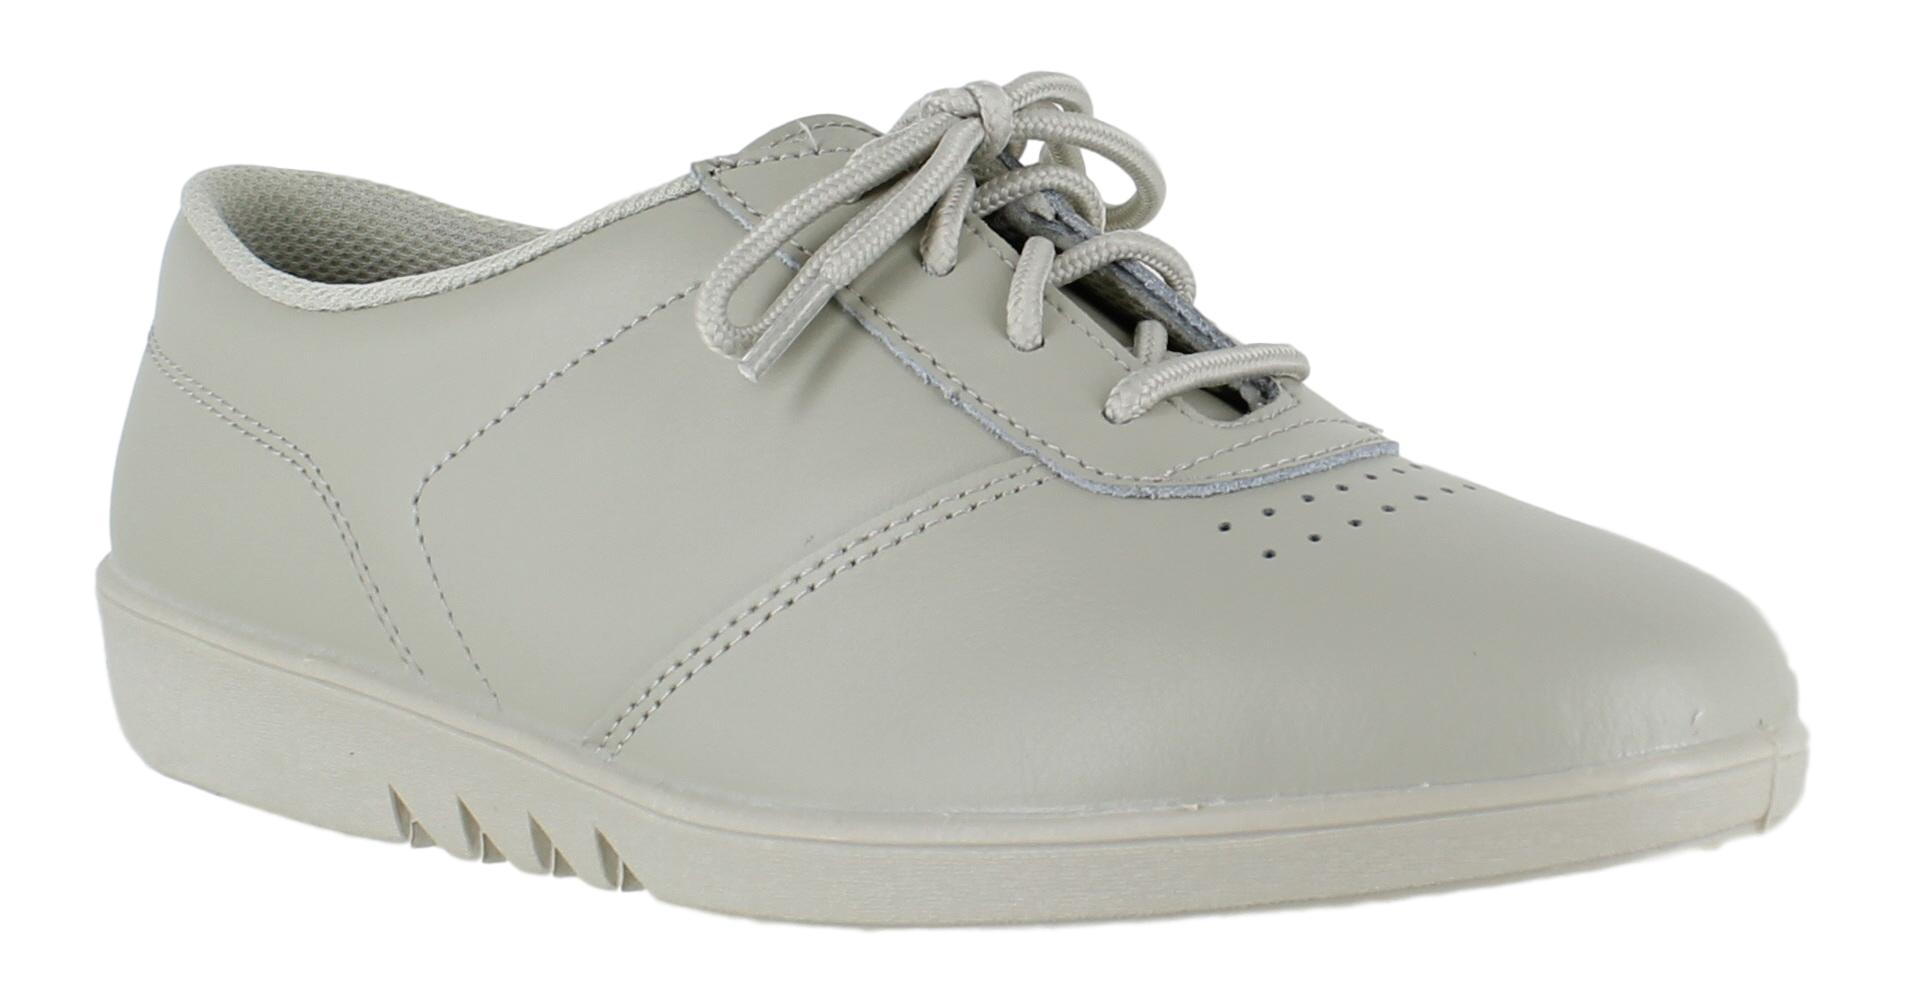 freestep lace up shoes